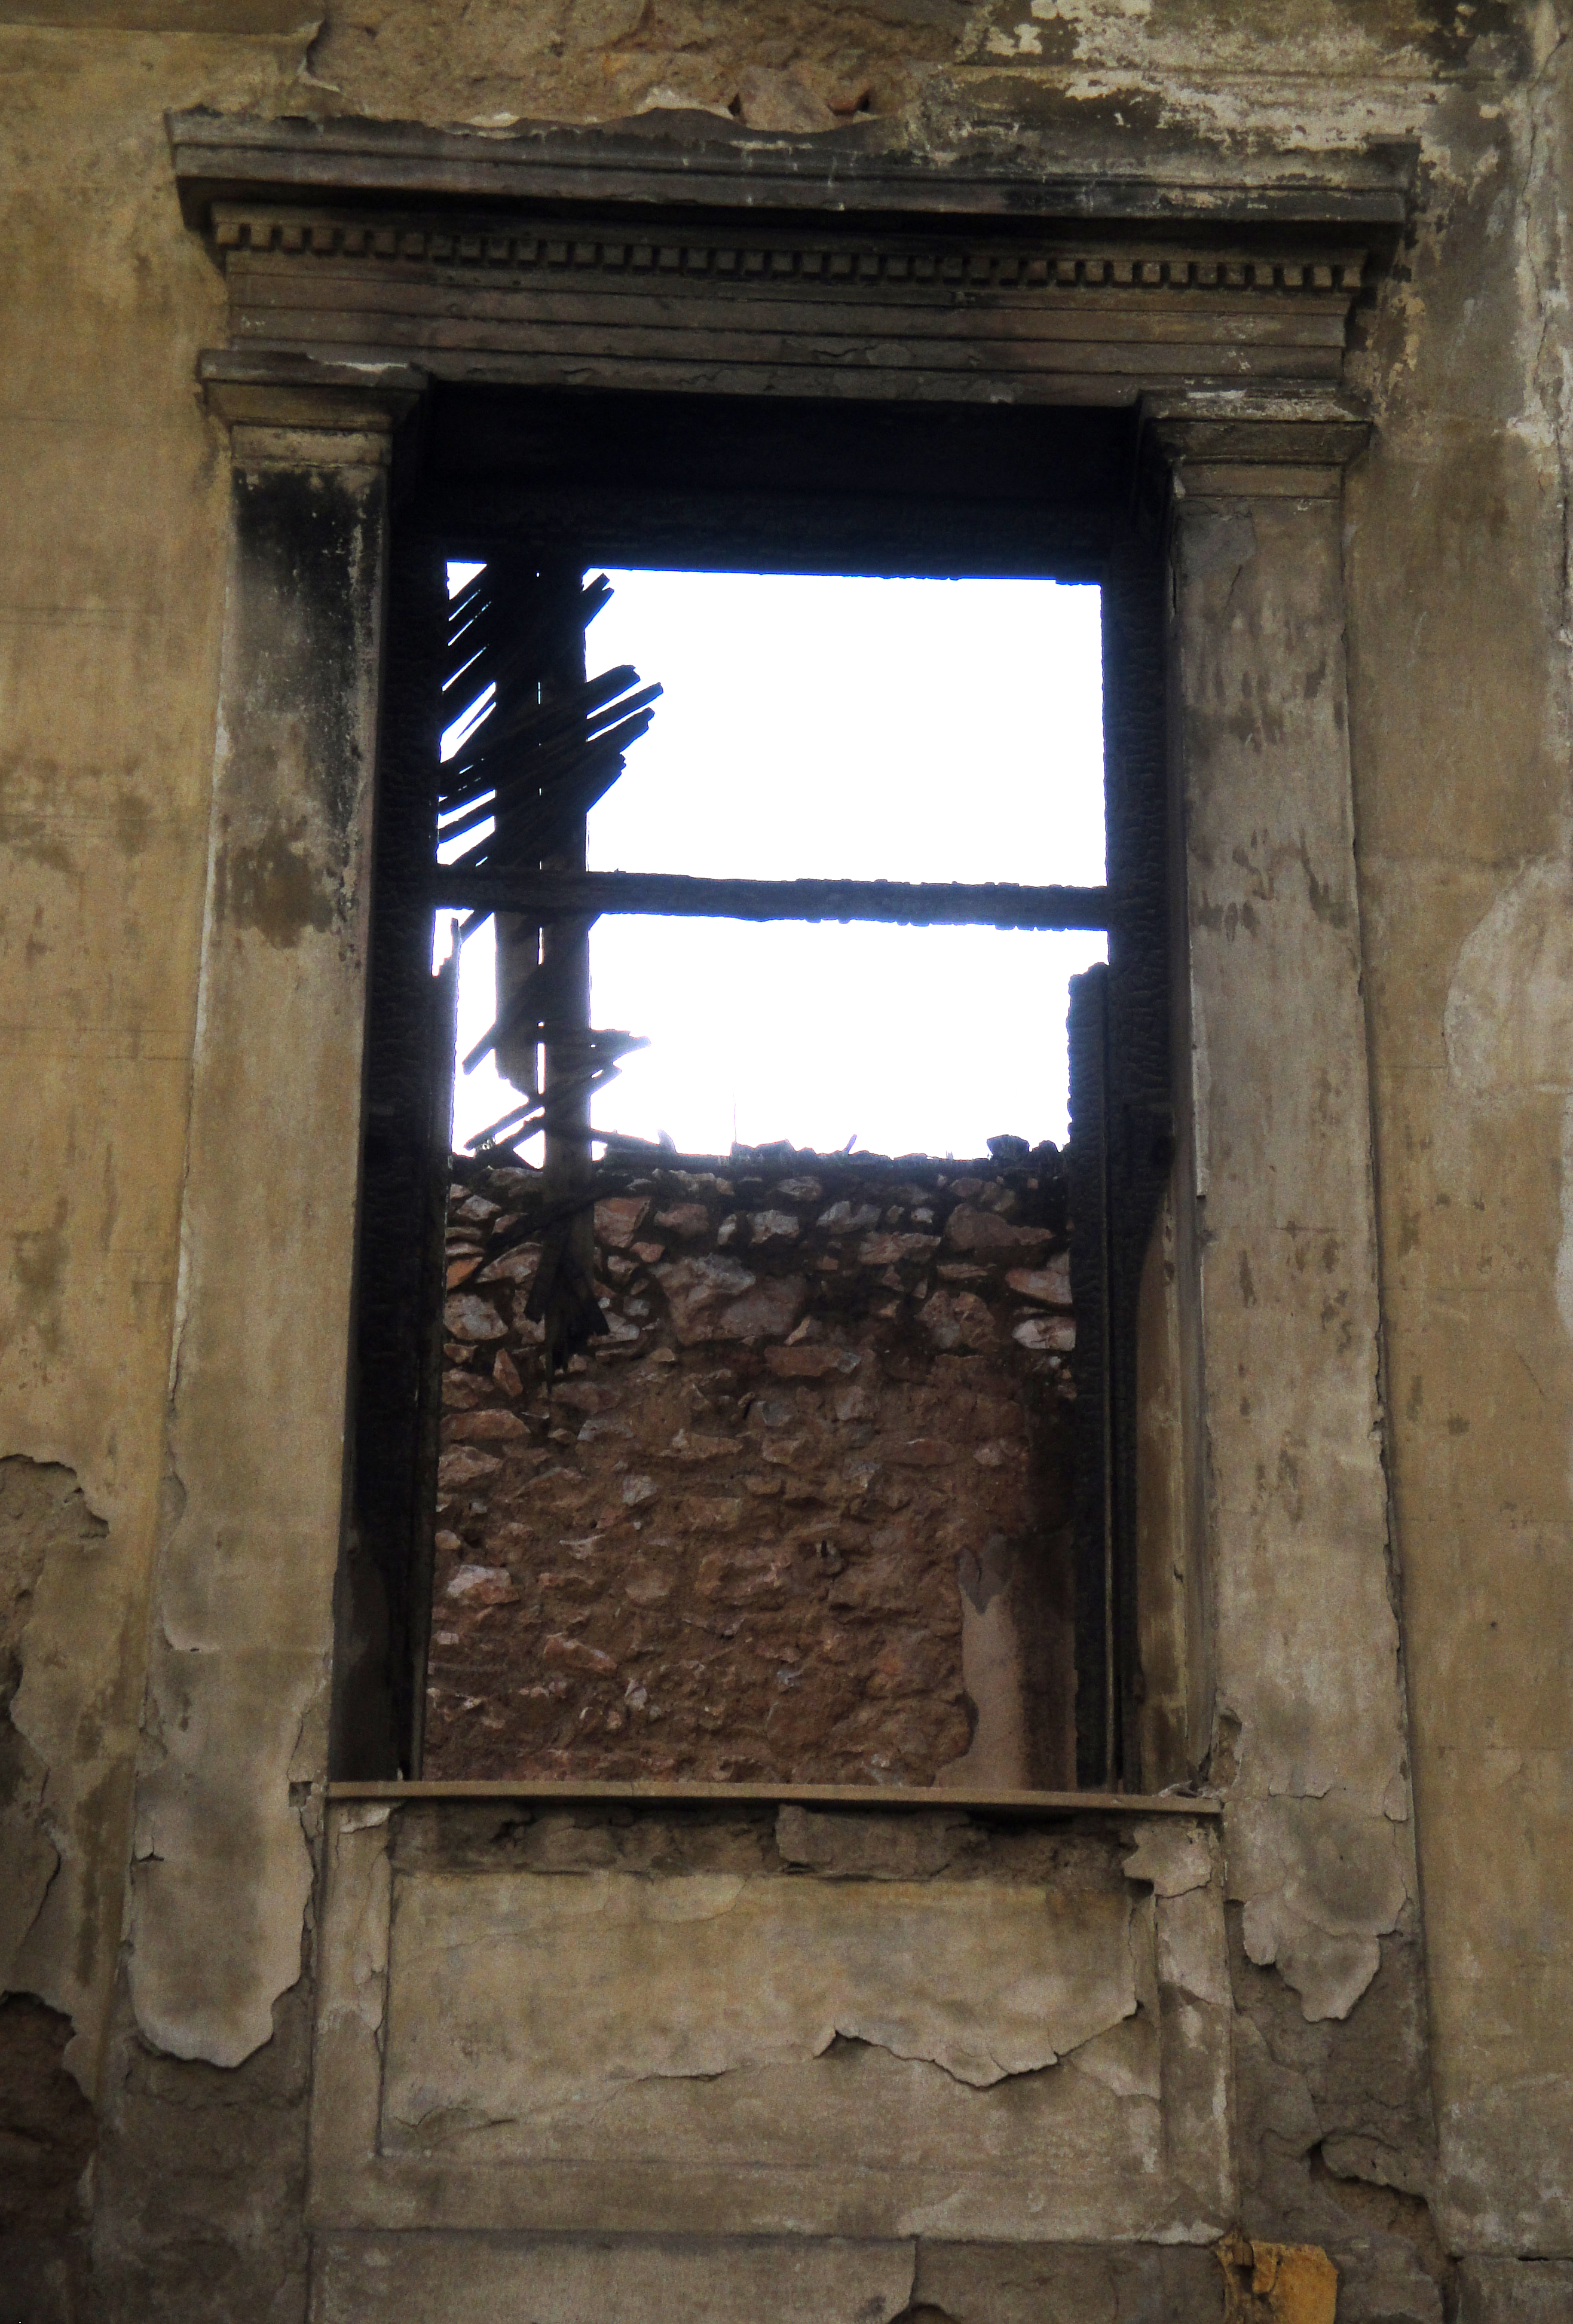 View of the window